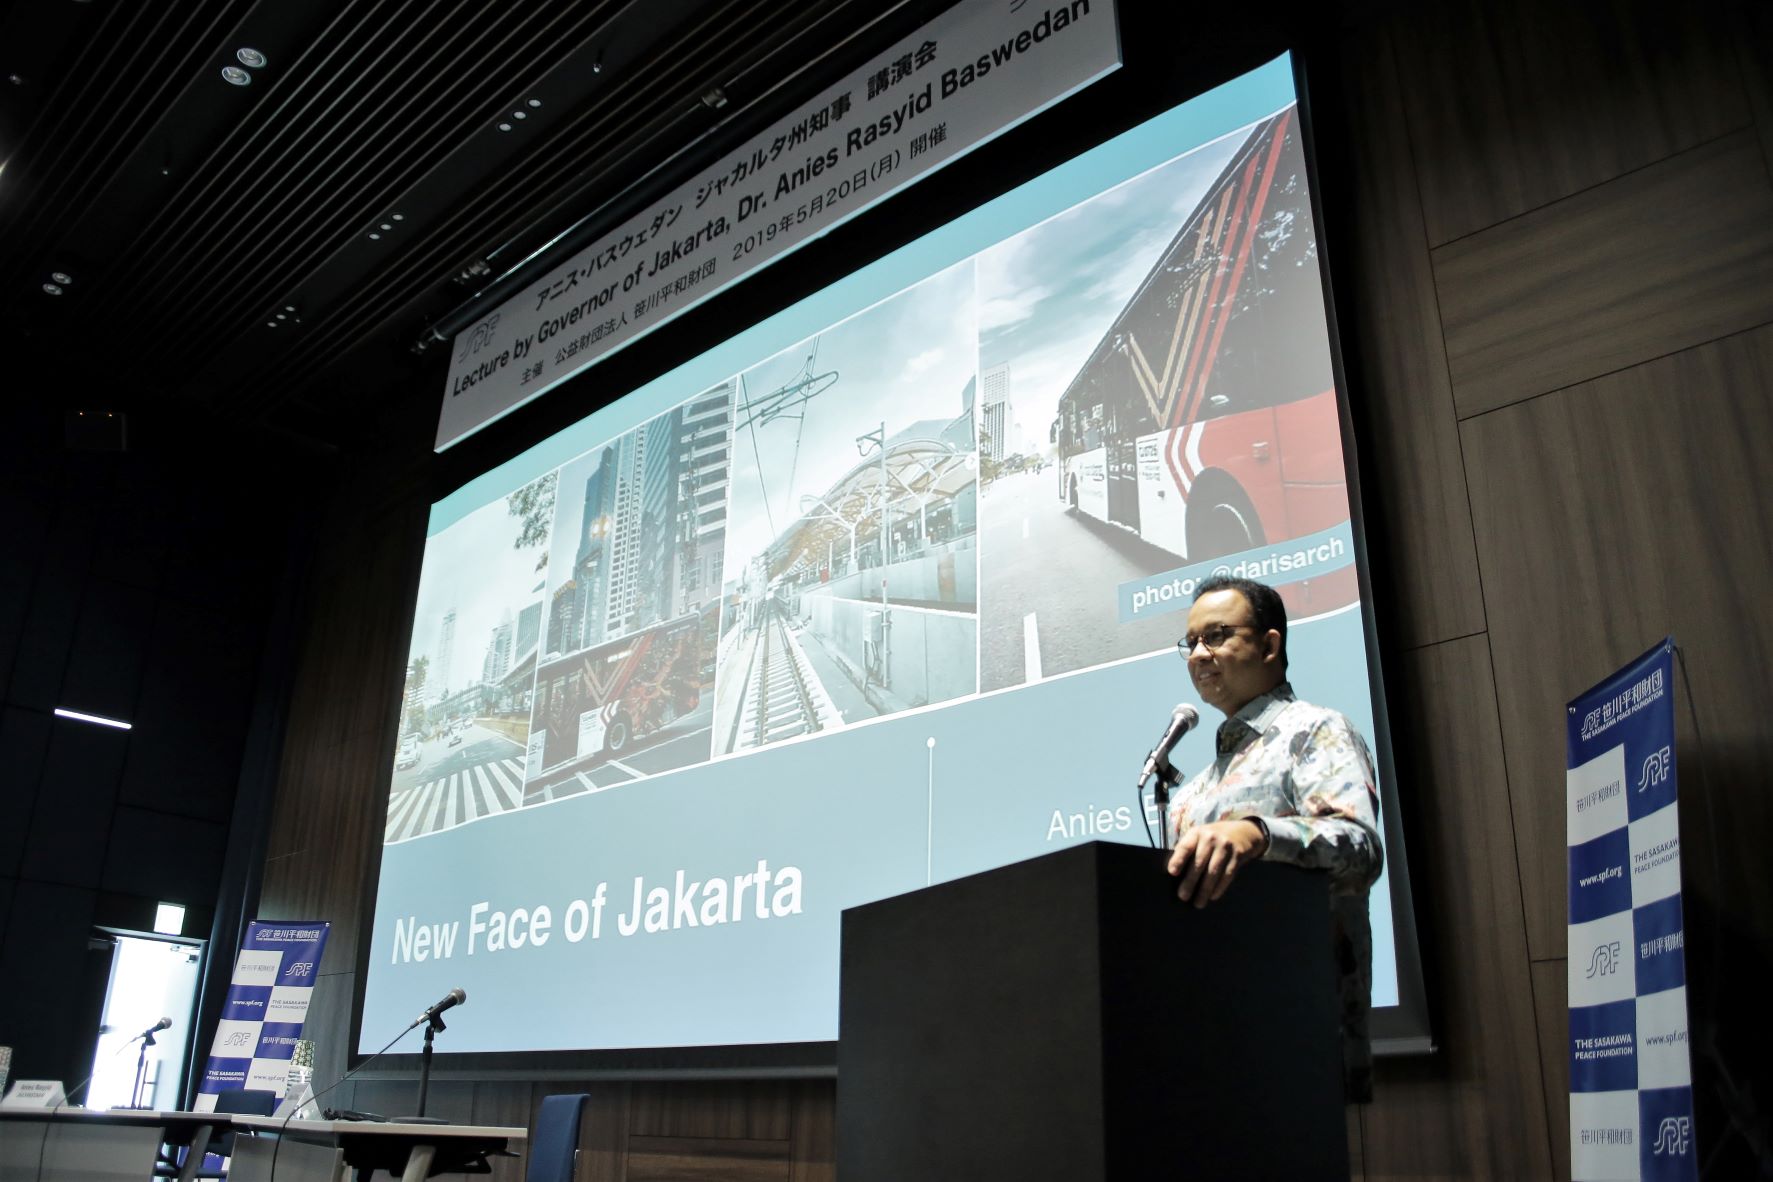 Governor of Jakarta Dr. Anies Baswedan during remarks at SPF